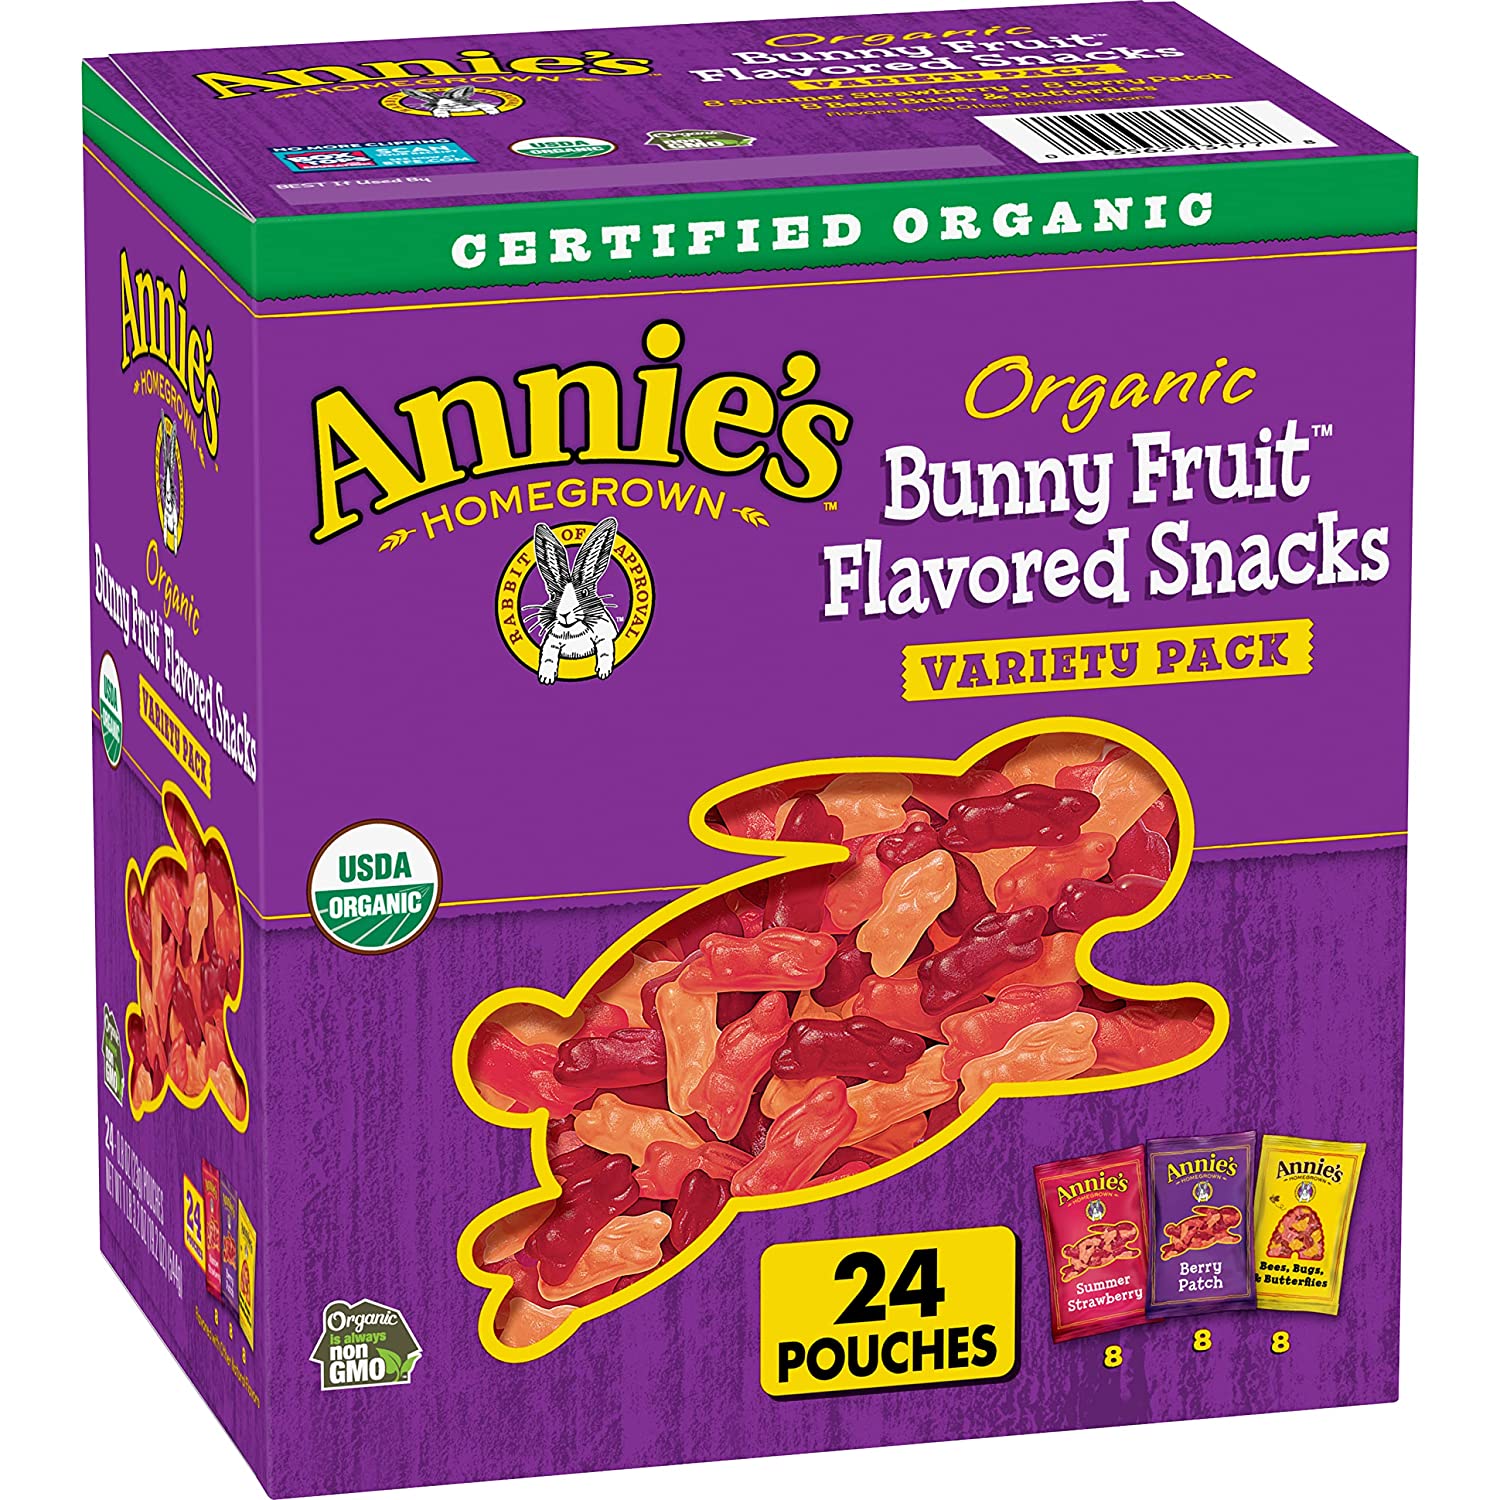 24-Pack 0.8-Oz Annie's Gluten Free Organic Bunny Fruit Snacks (Variety Pack) $9.20 & More w/ S&S + Free Shipping w/ Prime or on $25+